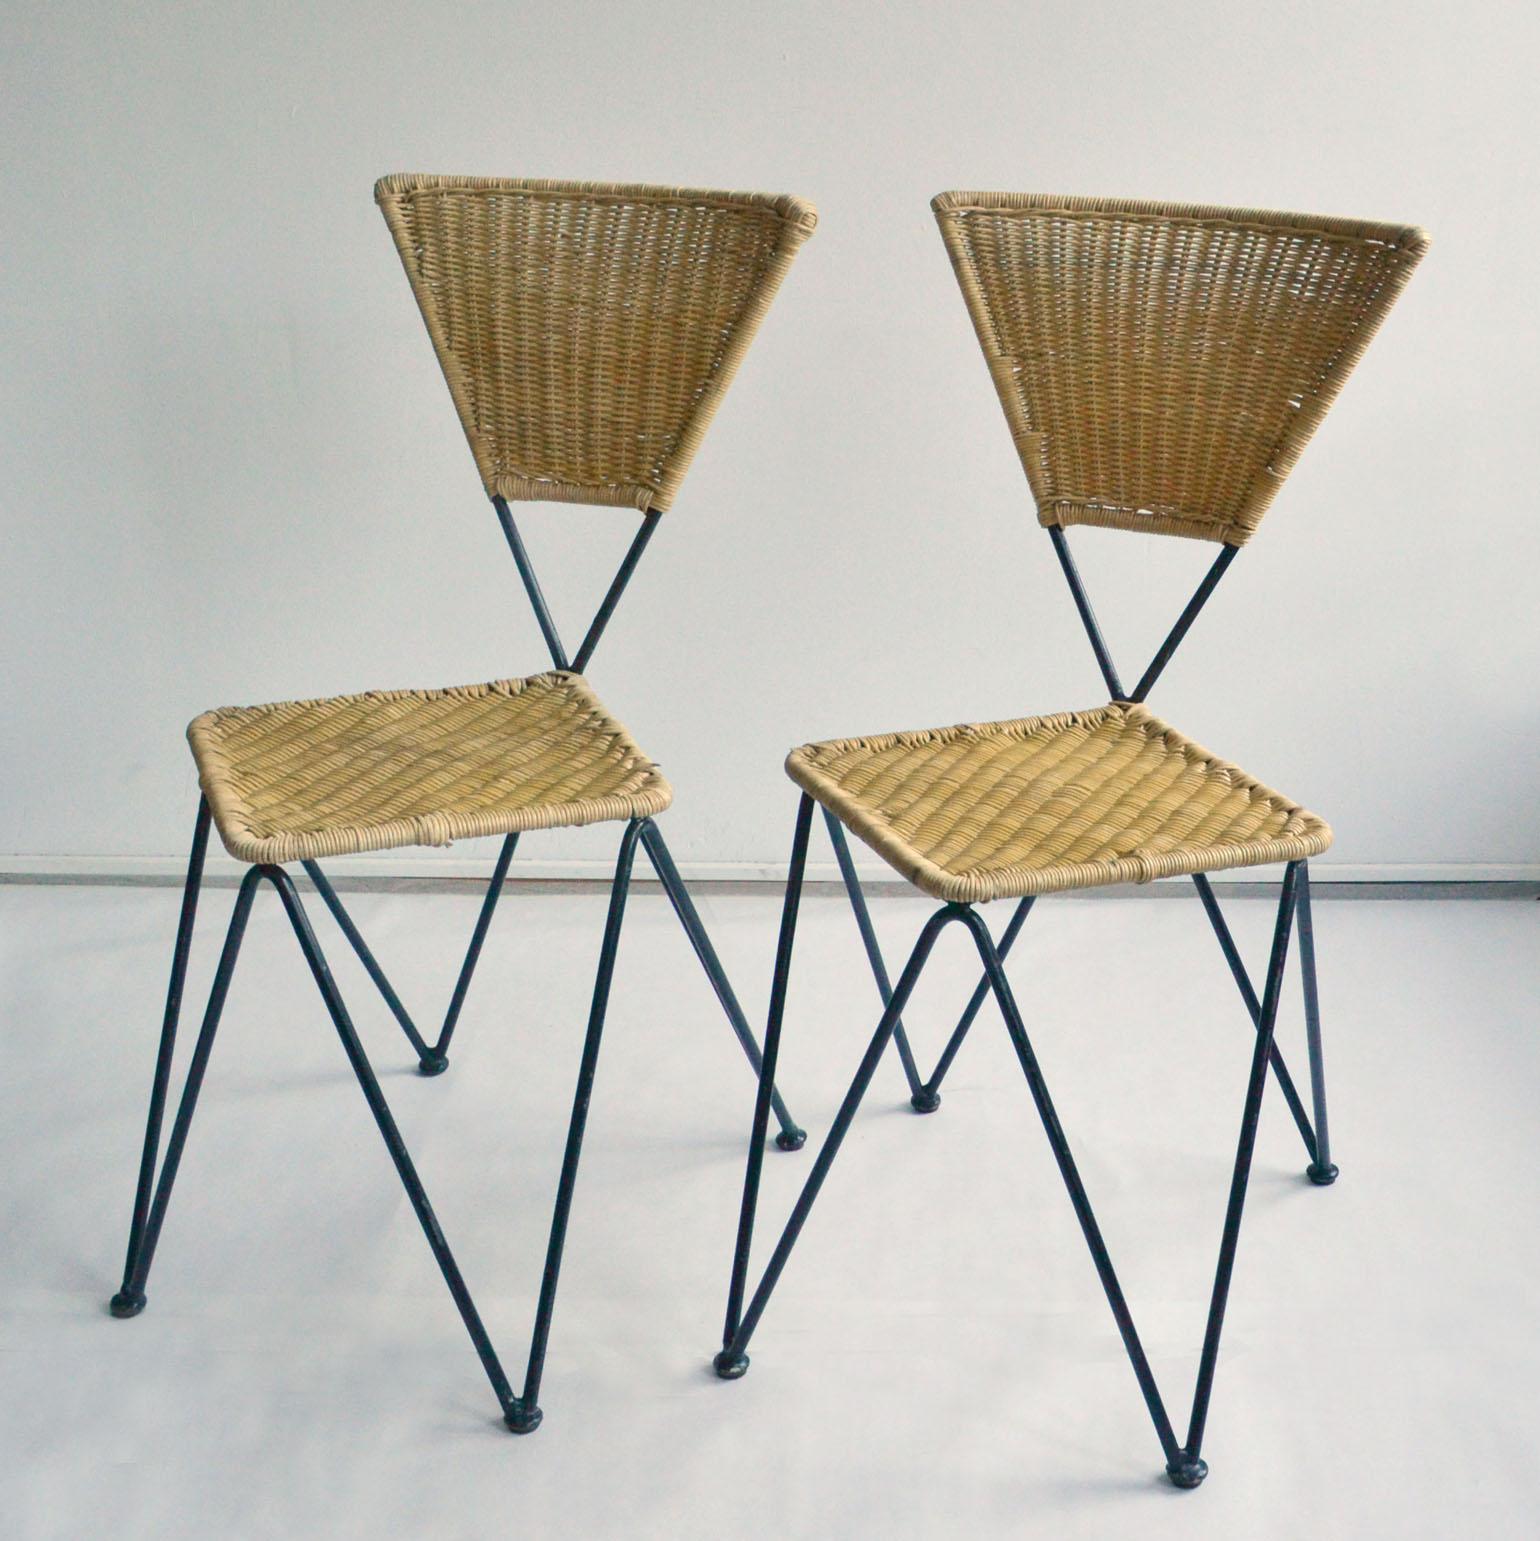 Set of 2 geometric wicker and metal dining chairs designed by Karl Fostel Erben and executed by Sonett, Vienna, circa 1950. The frame is made of black lacquered iron, the seat and back are woven in cane. These comfortable chairs can stack. 
The